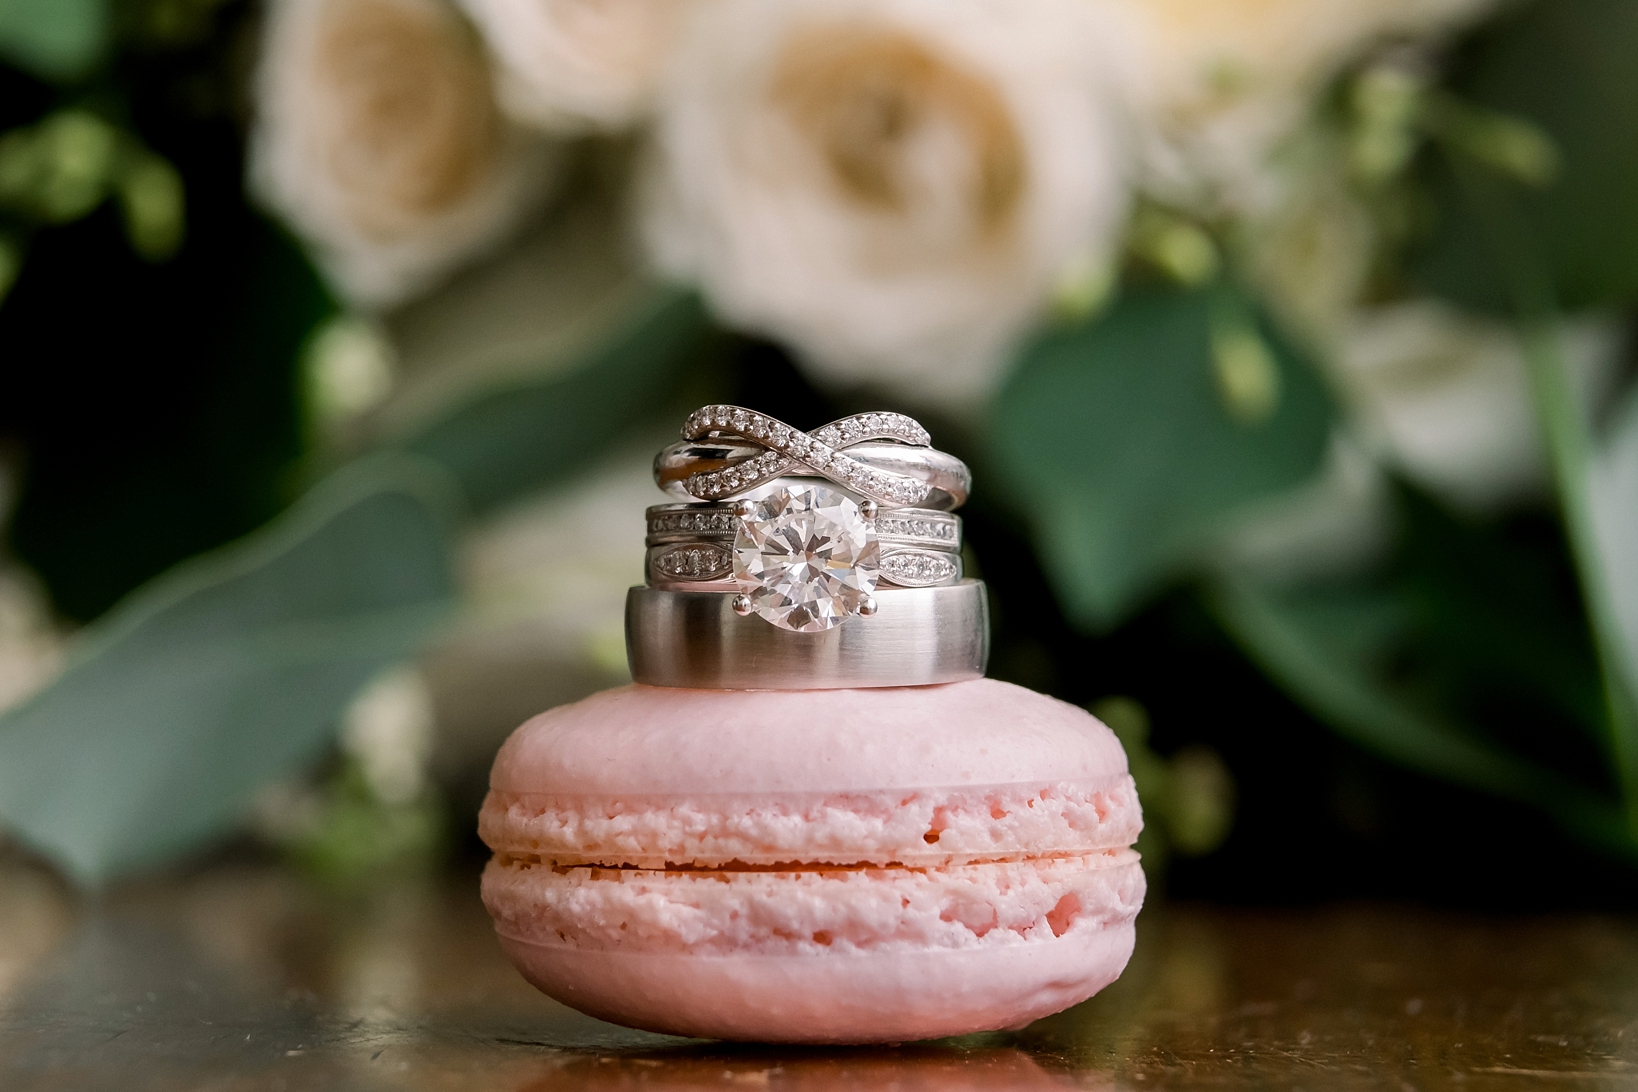 Close up photograph of the wedding bands on top of a macaron